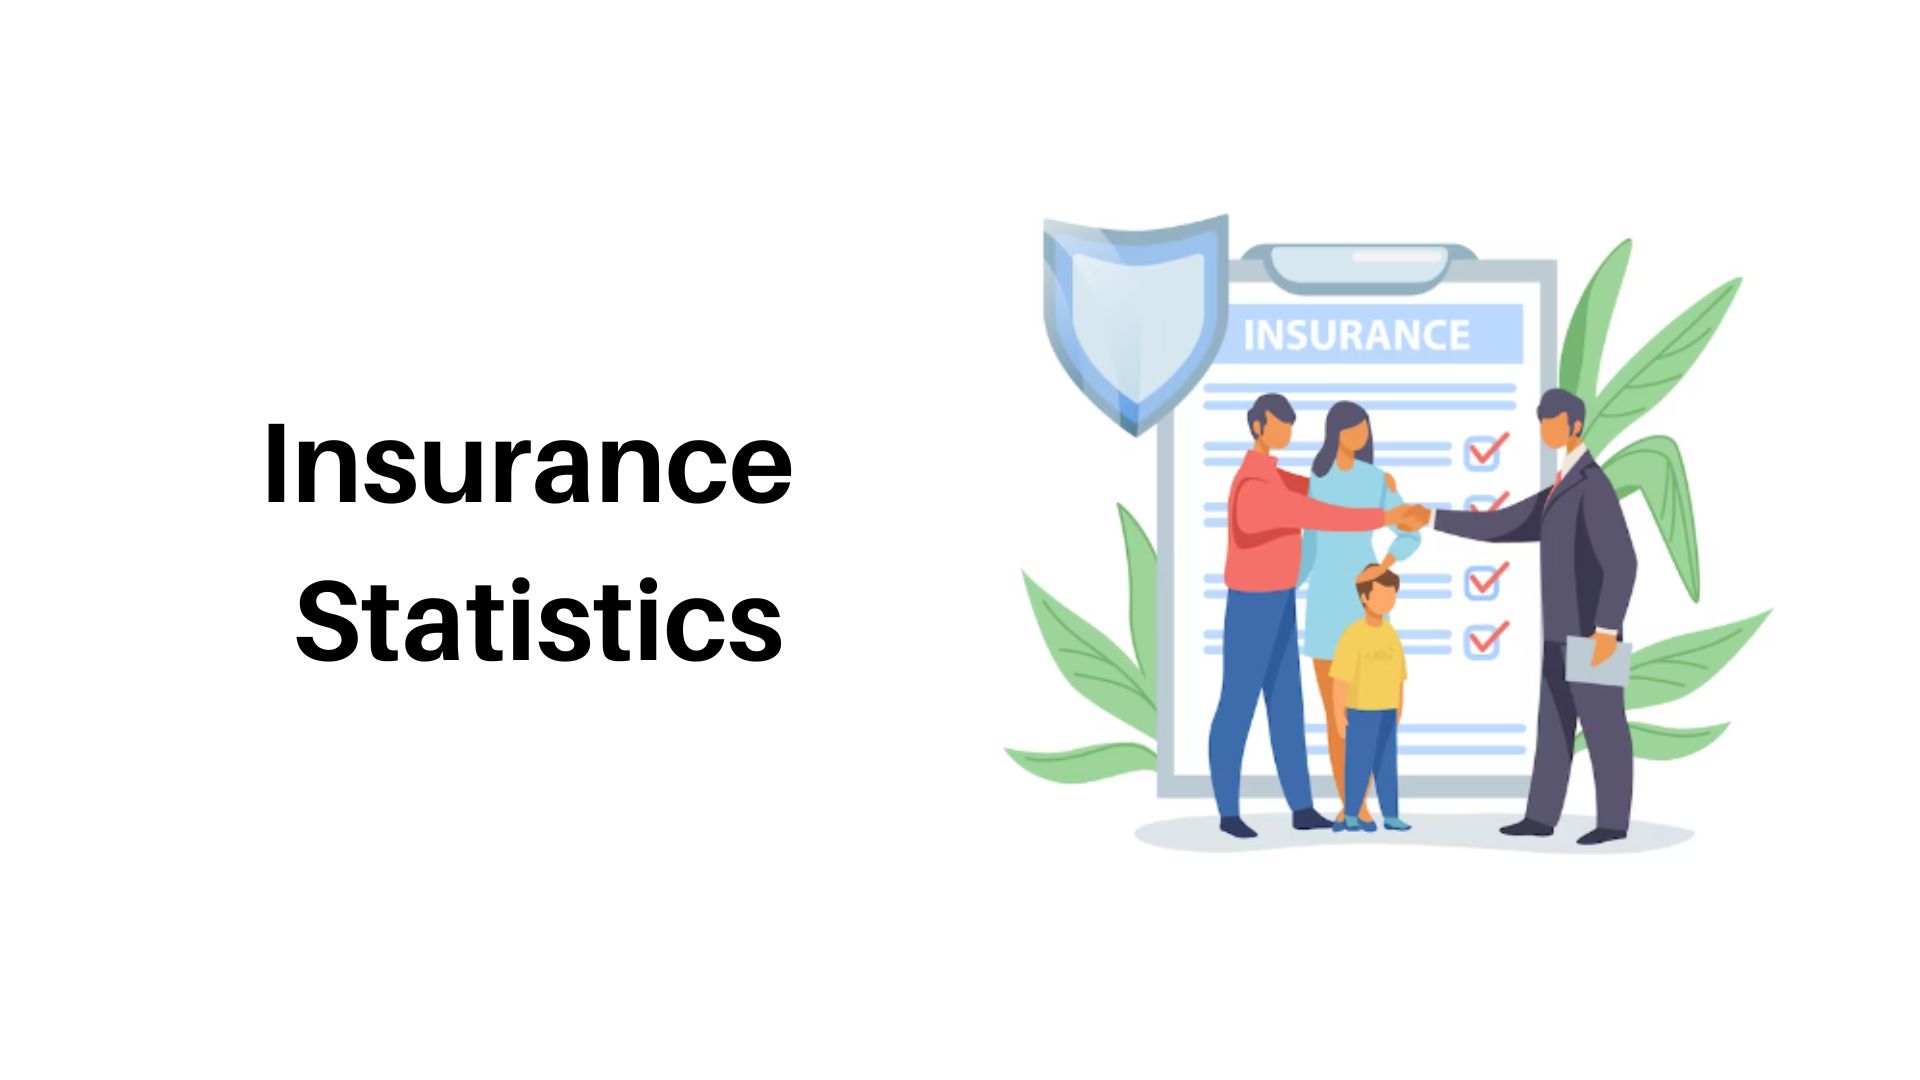 Insurance Industry Statistics By Market Size, Countries, Salary, Life Insurance, Age, Gender, Company Types and Region